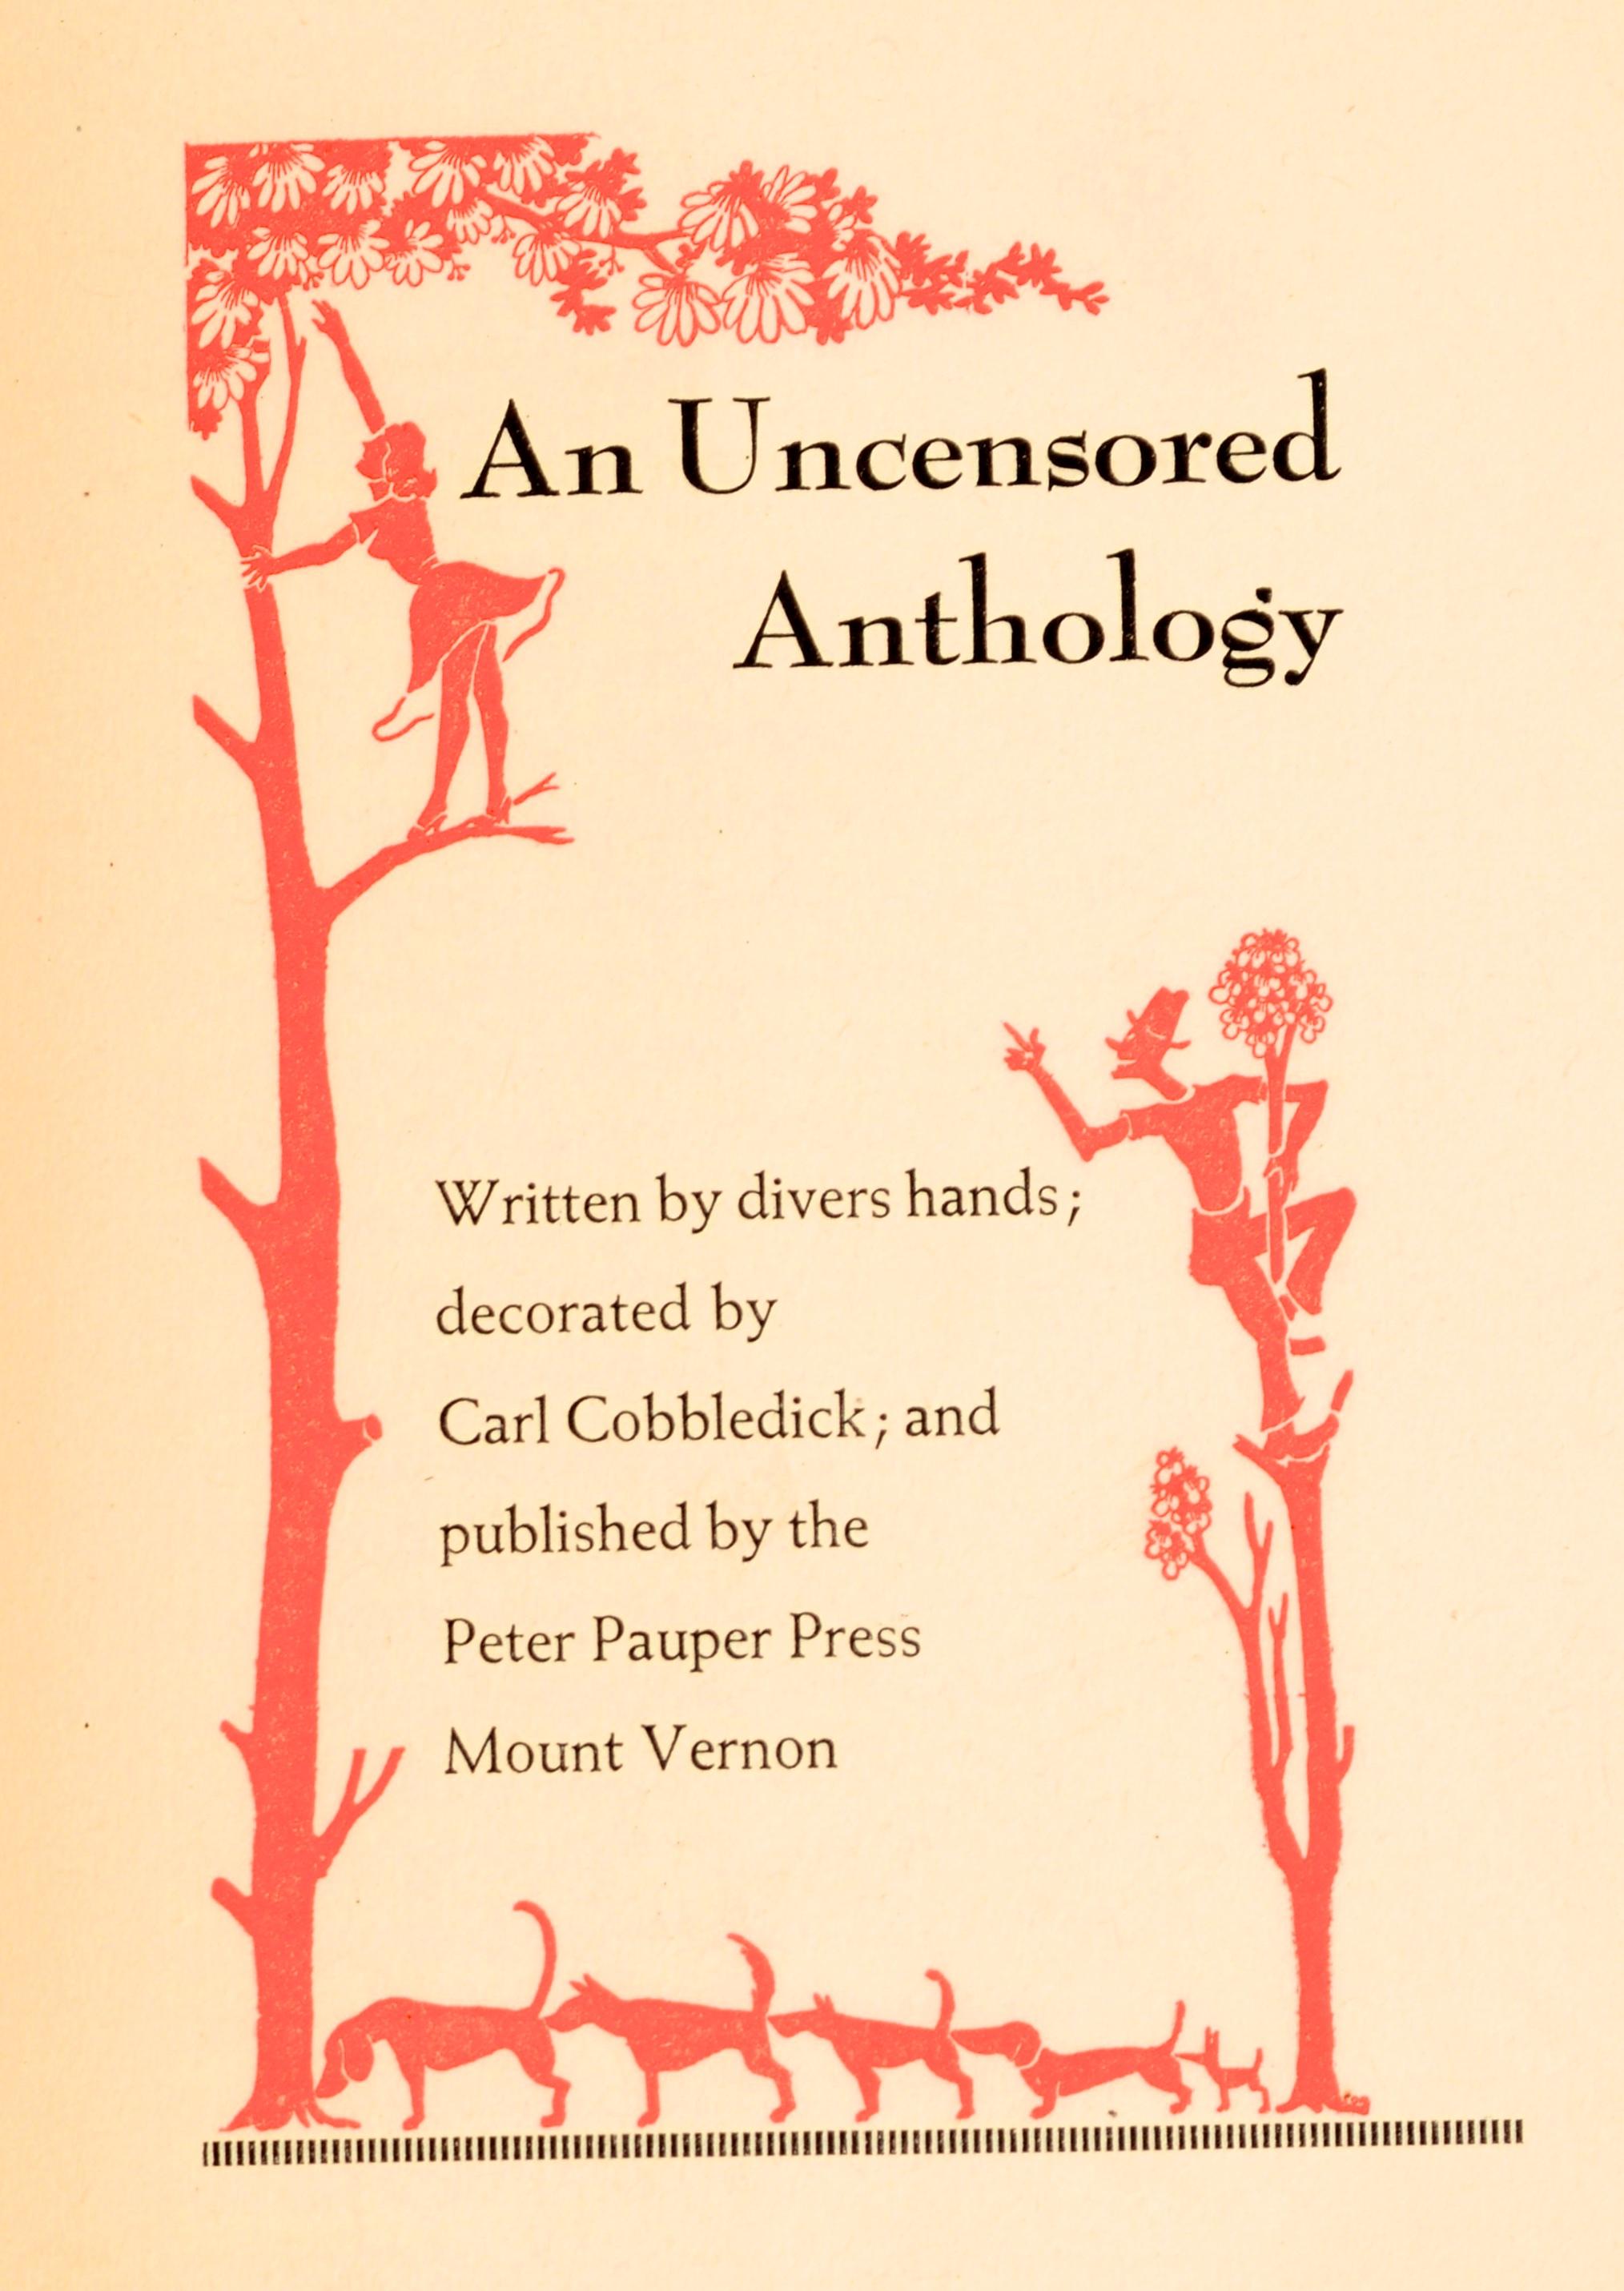 An Uncensored anthology gathered from many questionable sources.
Illustrated by Joseph Wynn. Published by The Peter Pauper Press, Mount Vernon, New York, 1939. The only copy in leather binding, possibly supplied to the writer. 1st Ed dark green